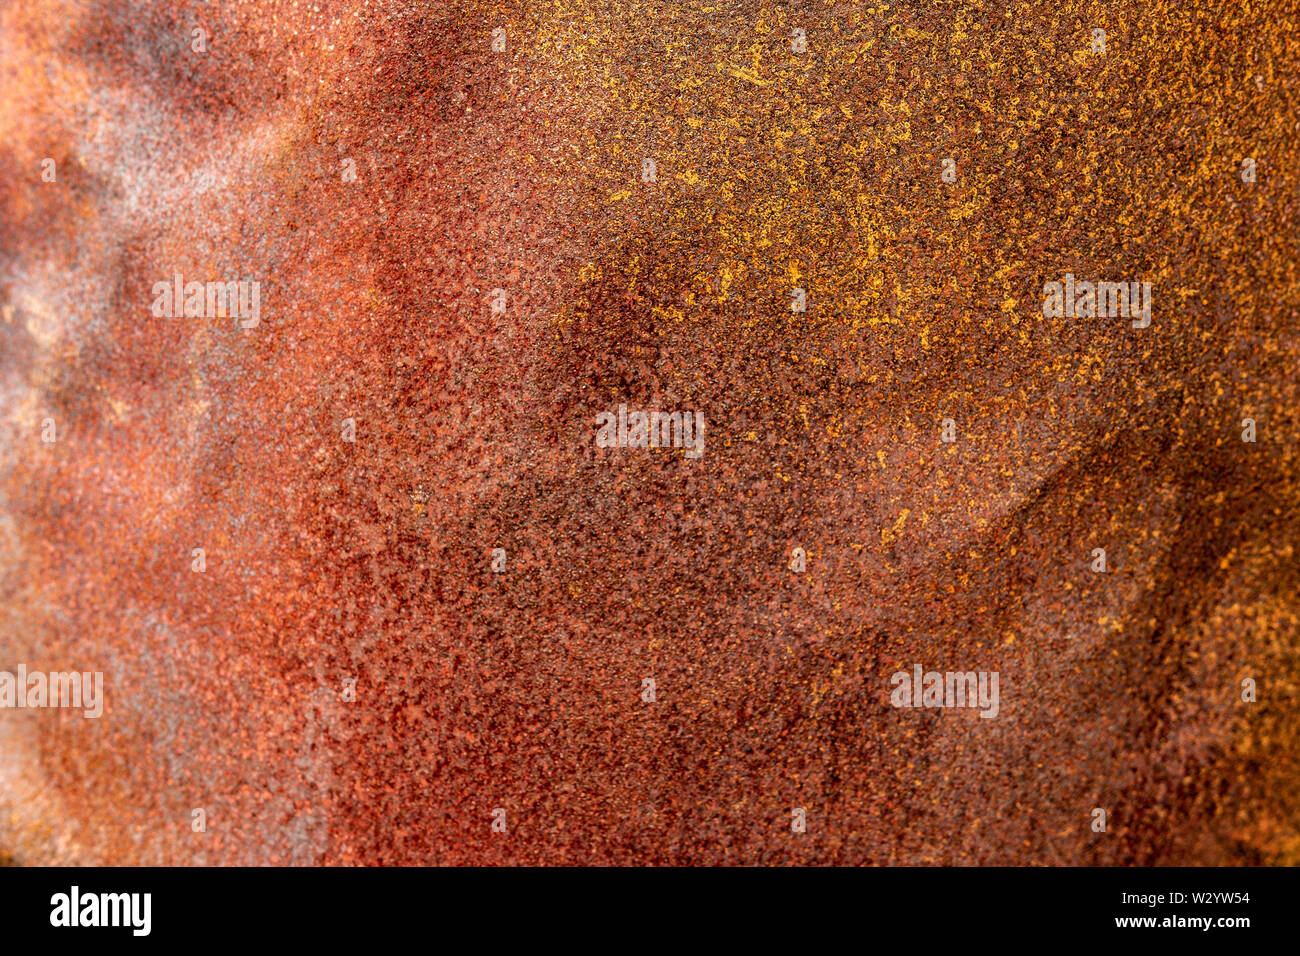 Old Metal Rusted Grunge Background. Rusty Corrosion Oxidized Iron Texture Surface. Stock Photo